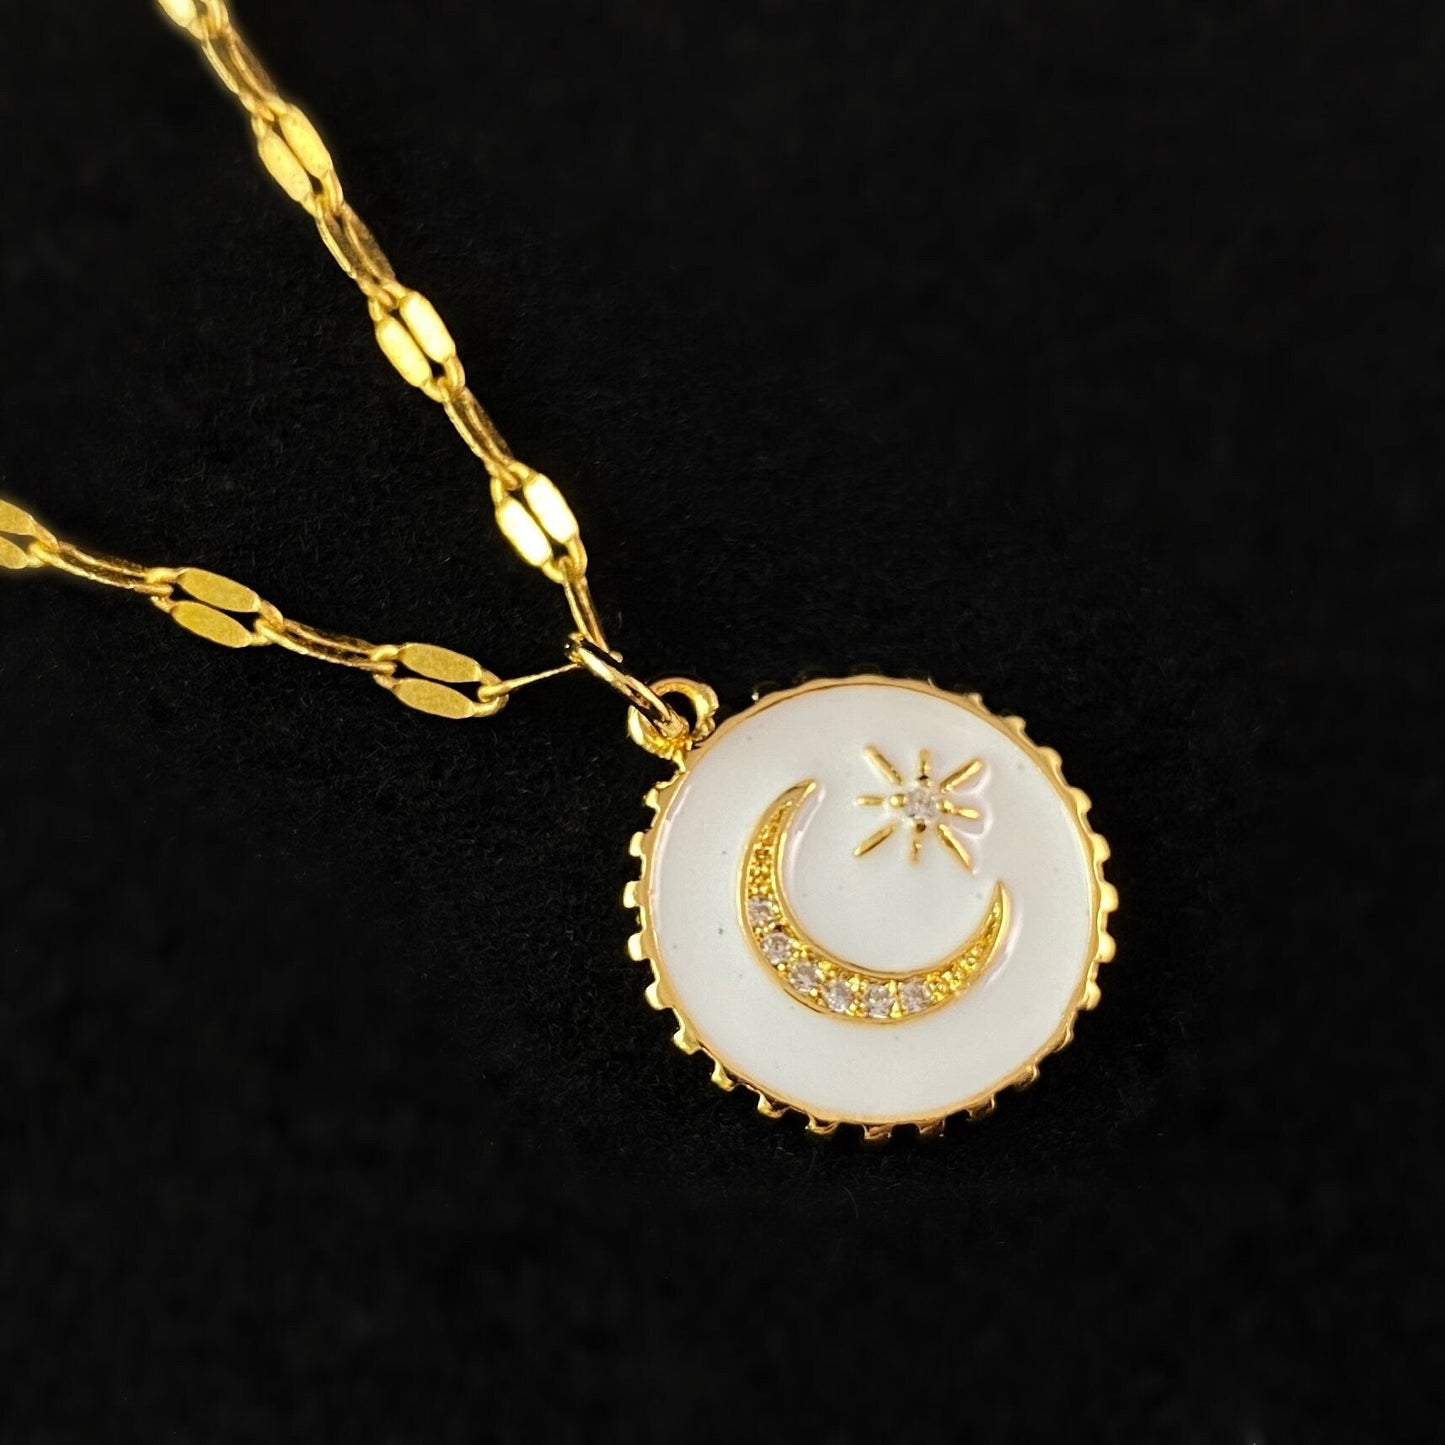 Enamel Moon and Star Pendant Necklace - La Vie Parisienne by Catherine Popesco